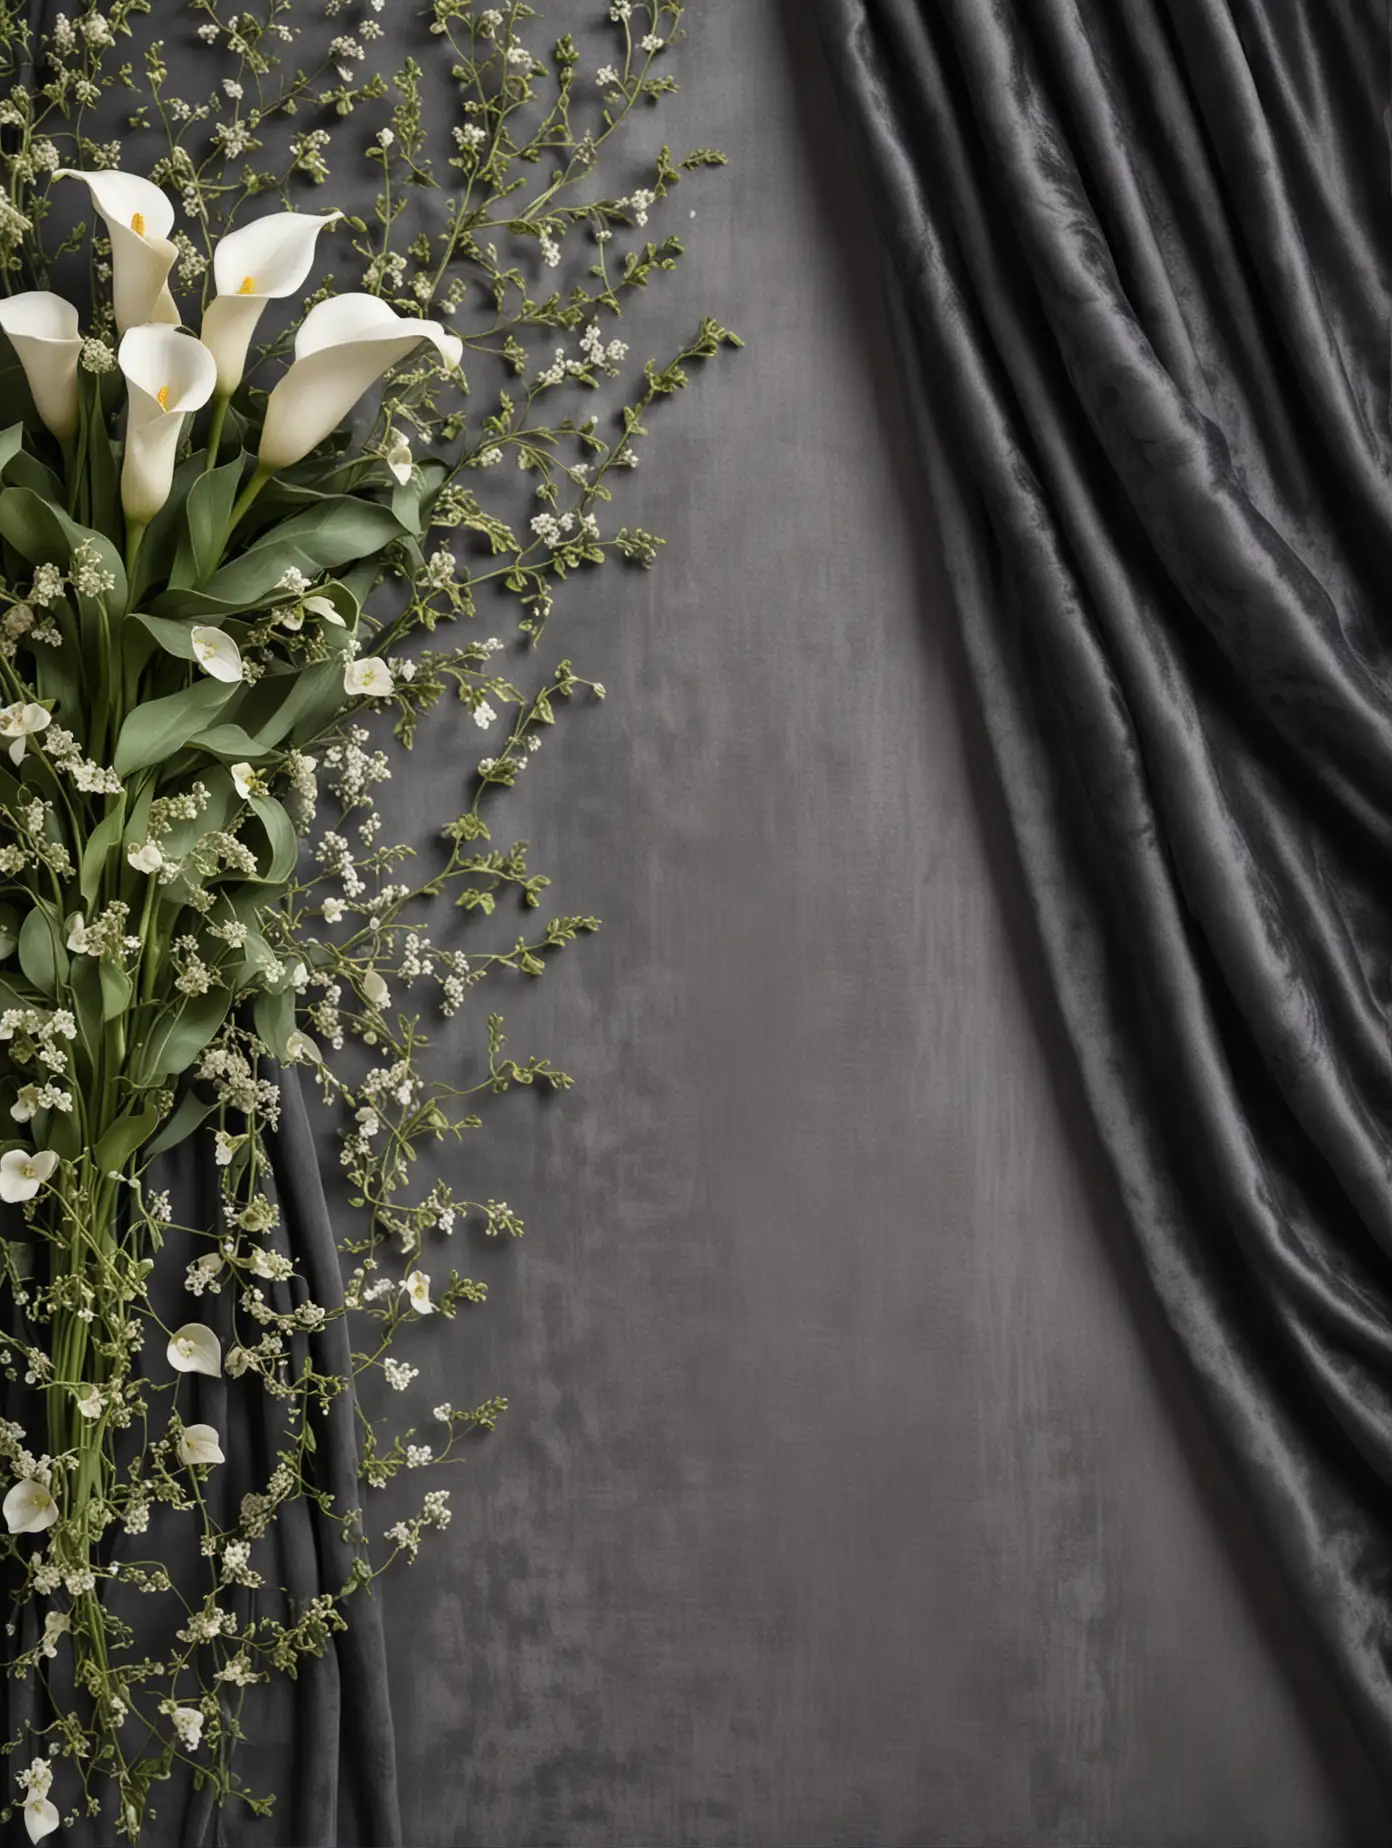 Elegant Border of Swirling Ivy and Floral Accents on Draped Velvet Fabric